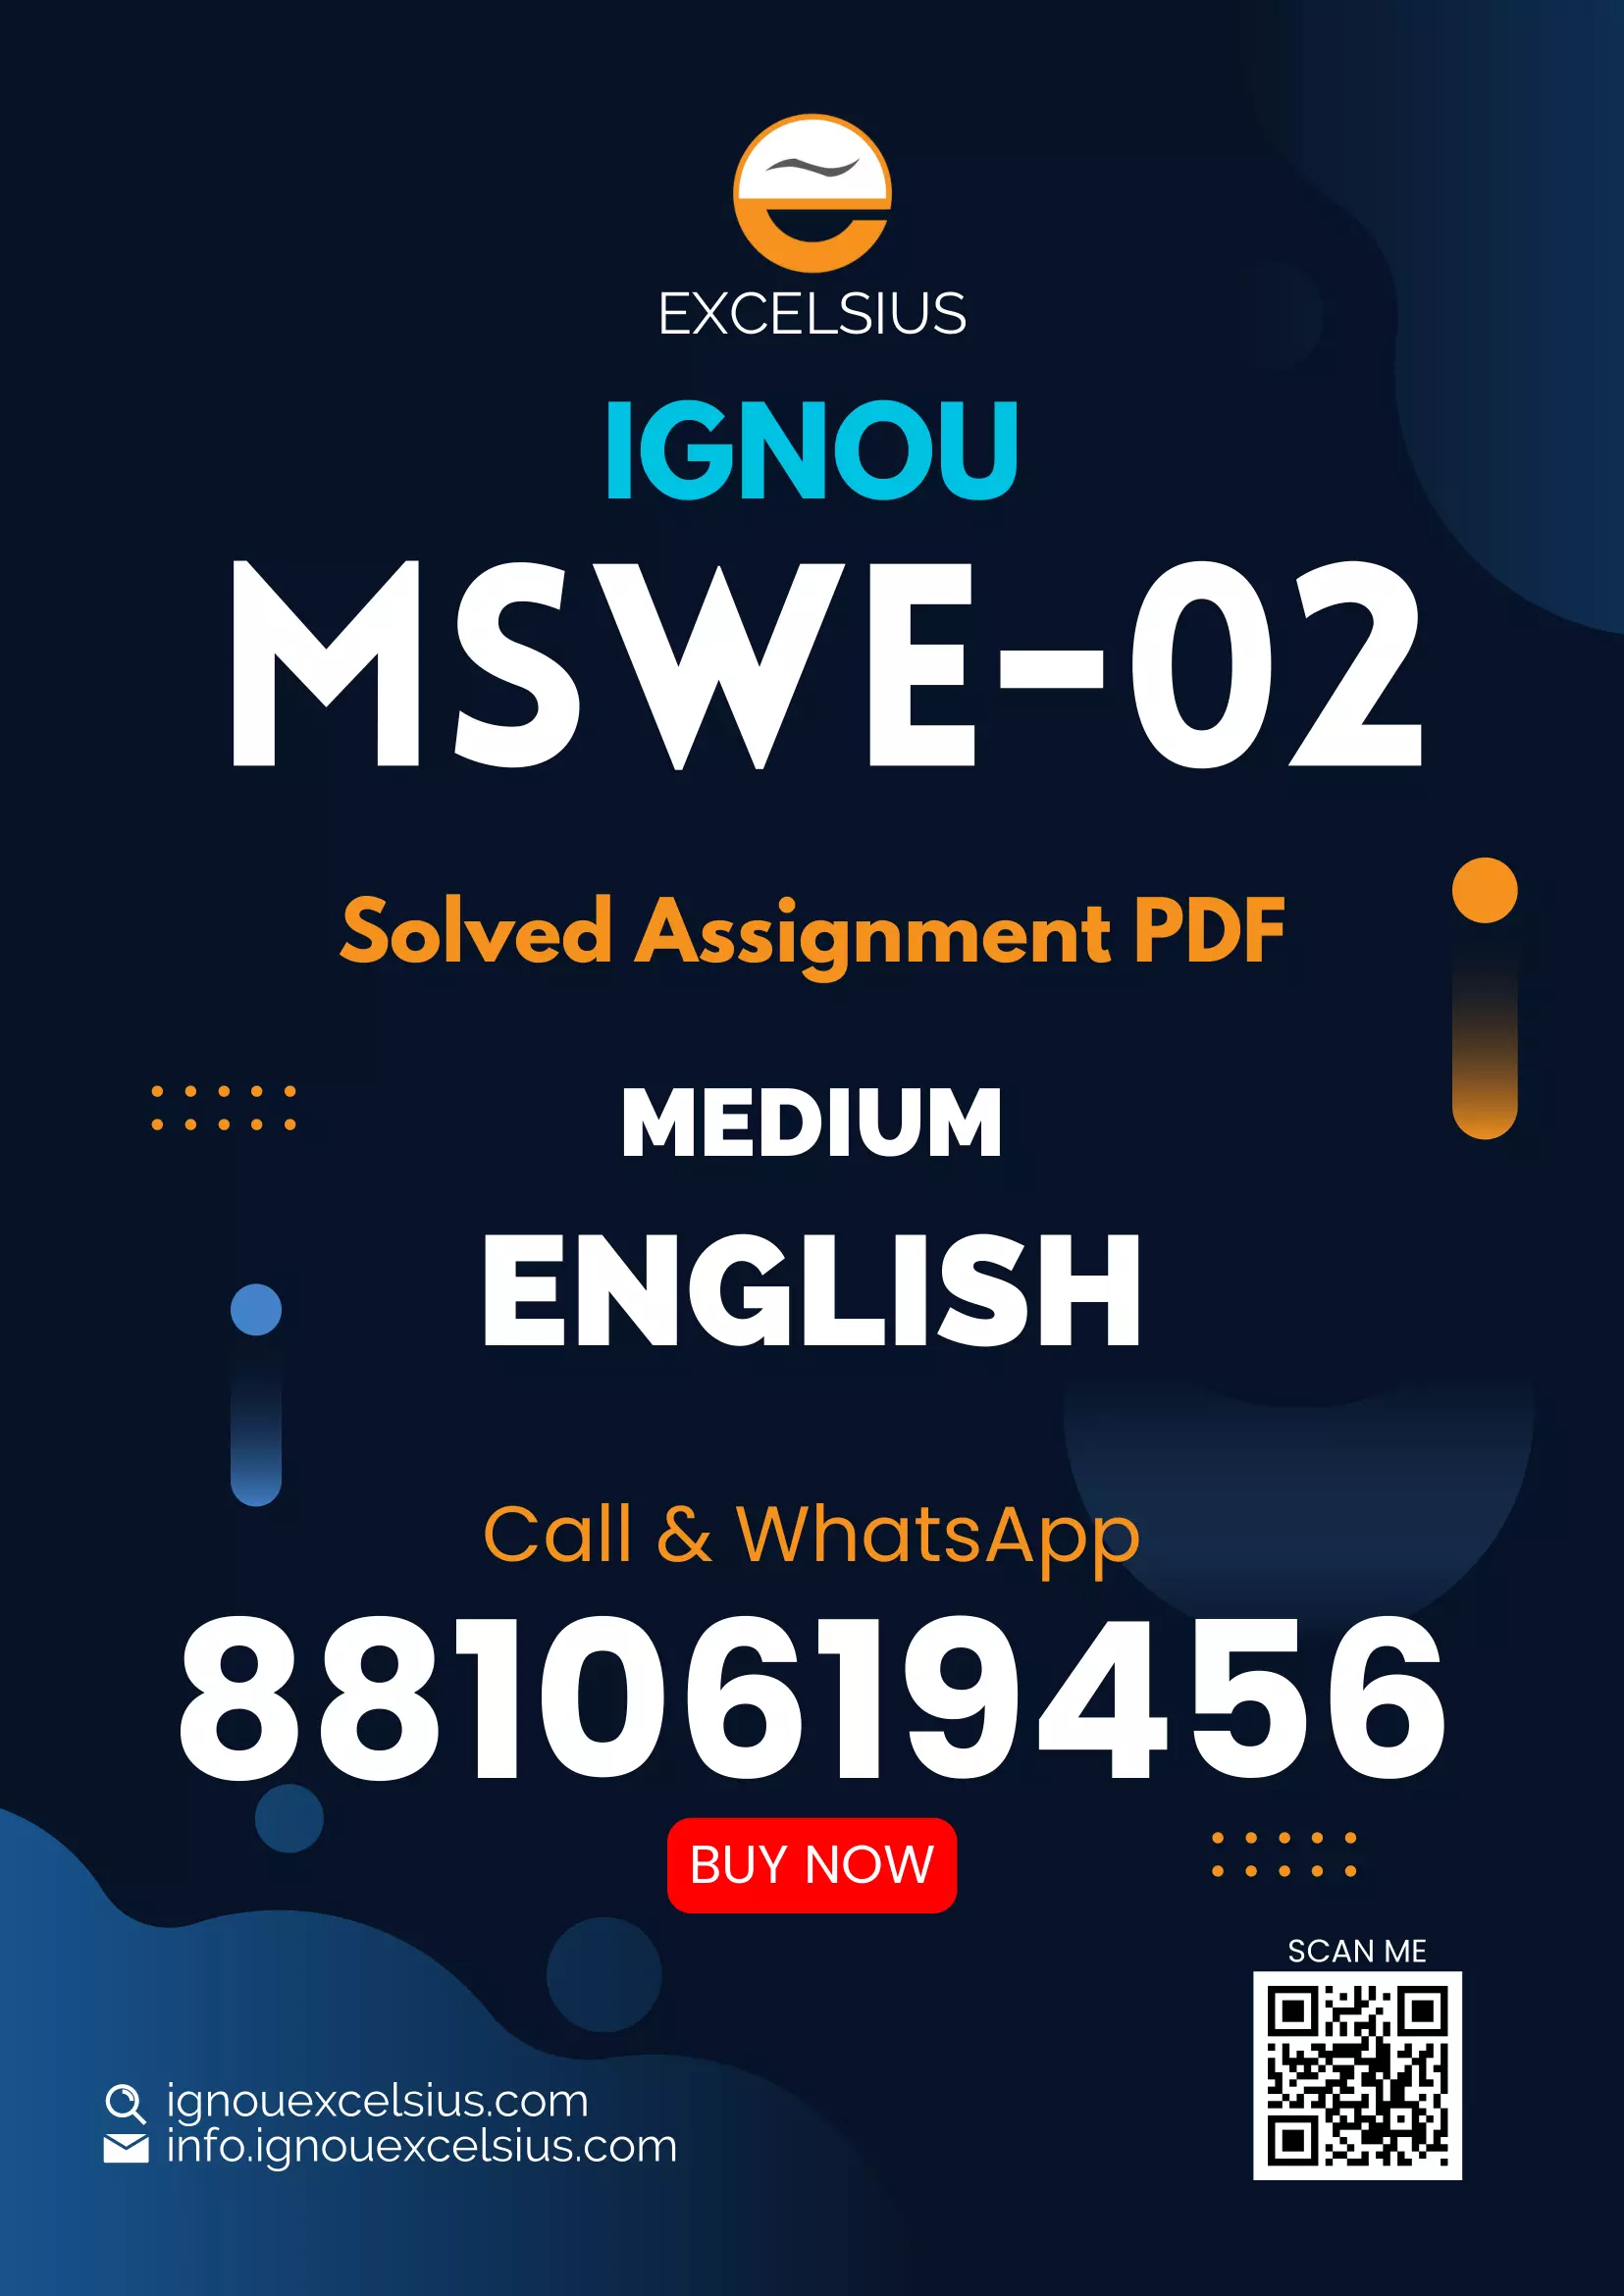 IGNOU MSWE-02 - Women and Child Development, Latest Solved Assignment-July 2022 – January 2023